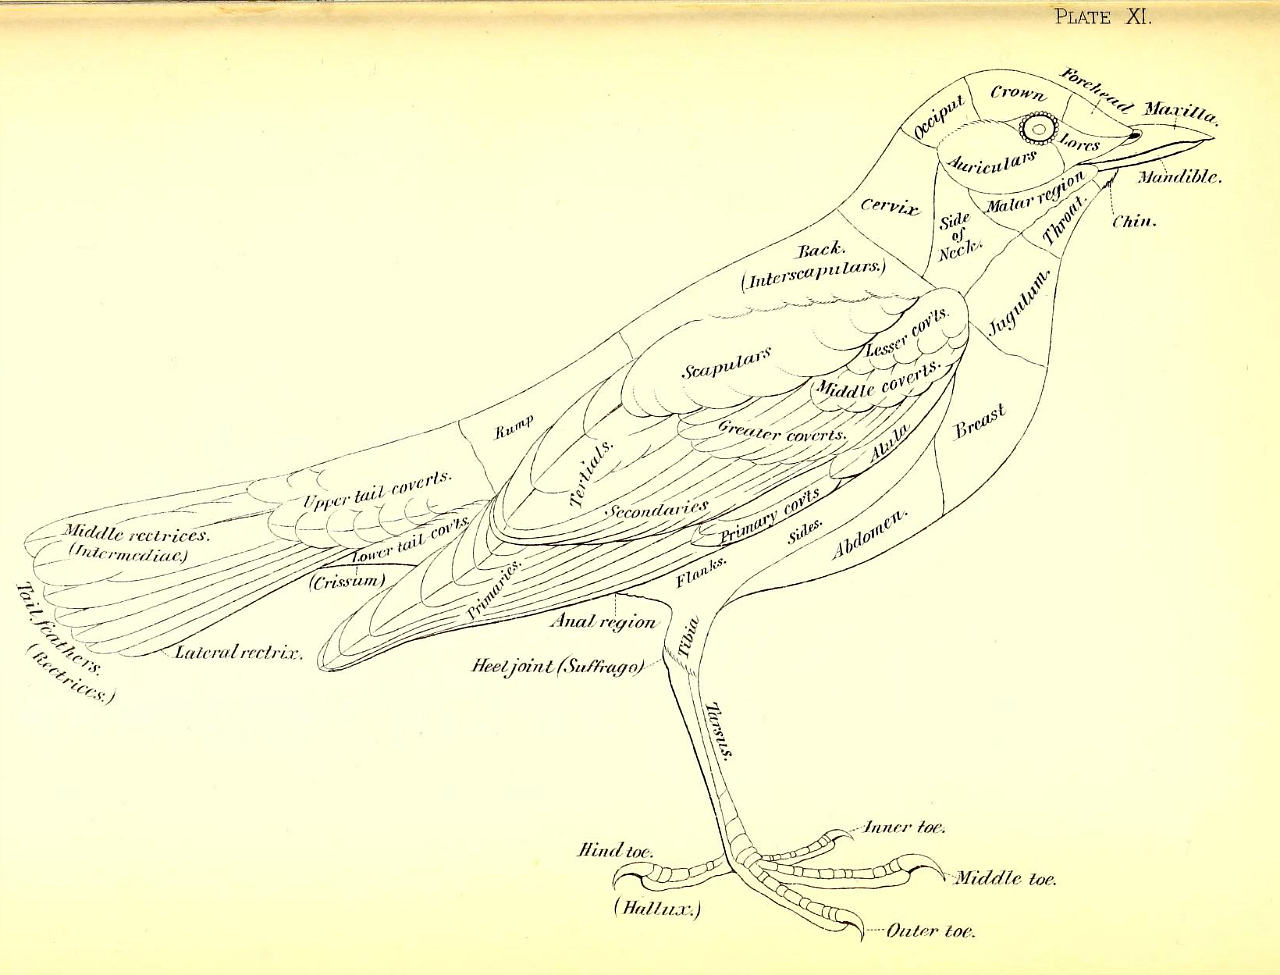 Bird diagram from the 1886 'A nomenclature of colors for naturalists : and compendium of useful knowledge for ornithologists' by Robert Ridgway (via Smithsonian Libraries)